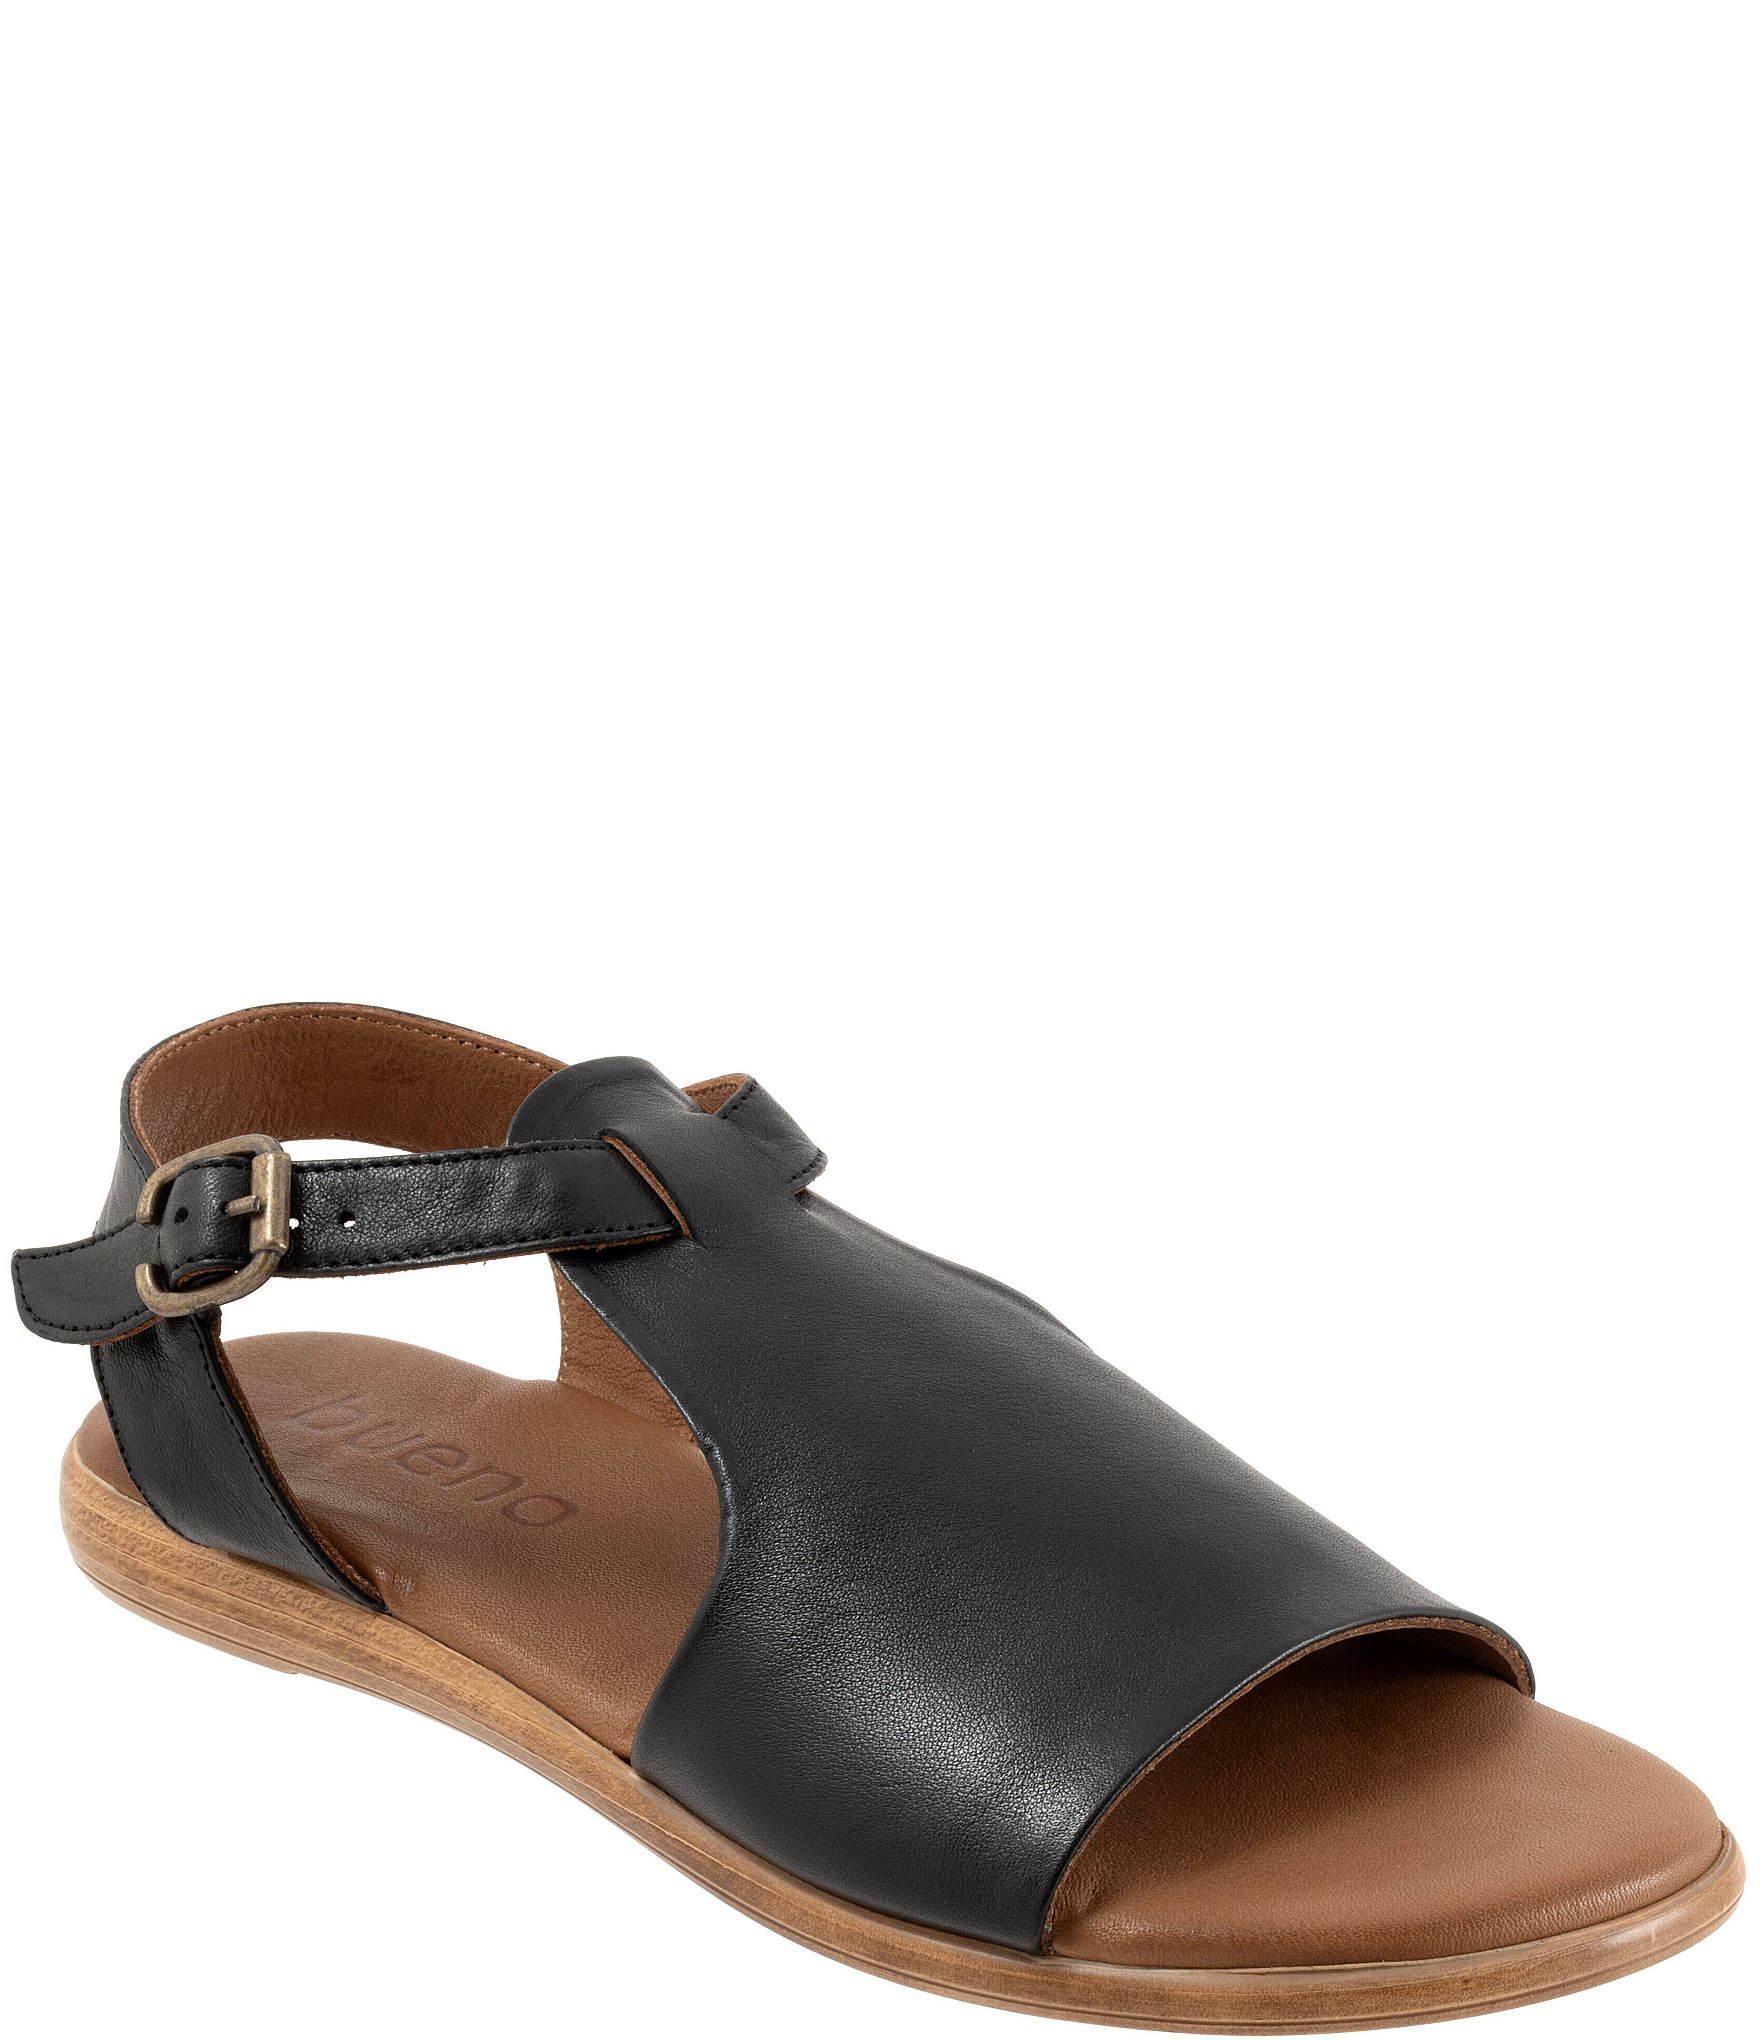 Genuine Leather Women Sandals, Leather Sandal Shoe, Leather Flats Shoes